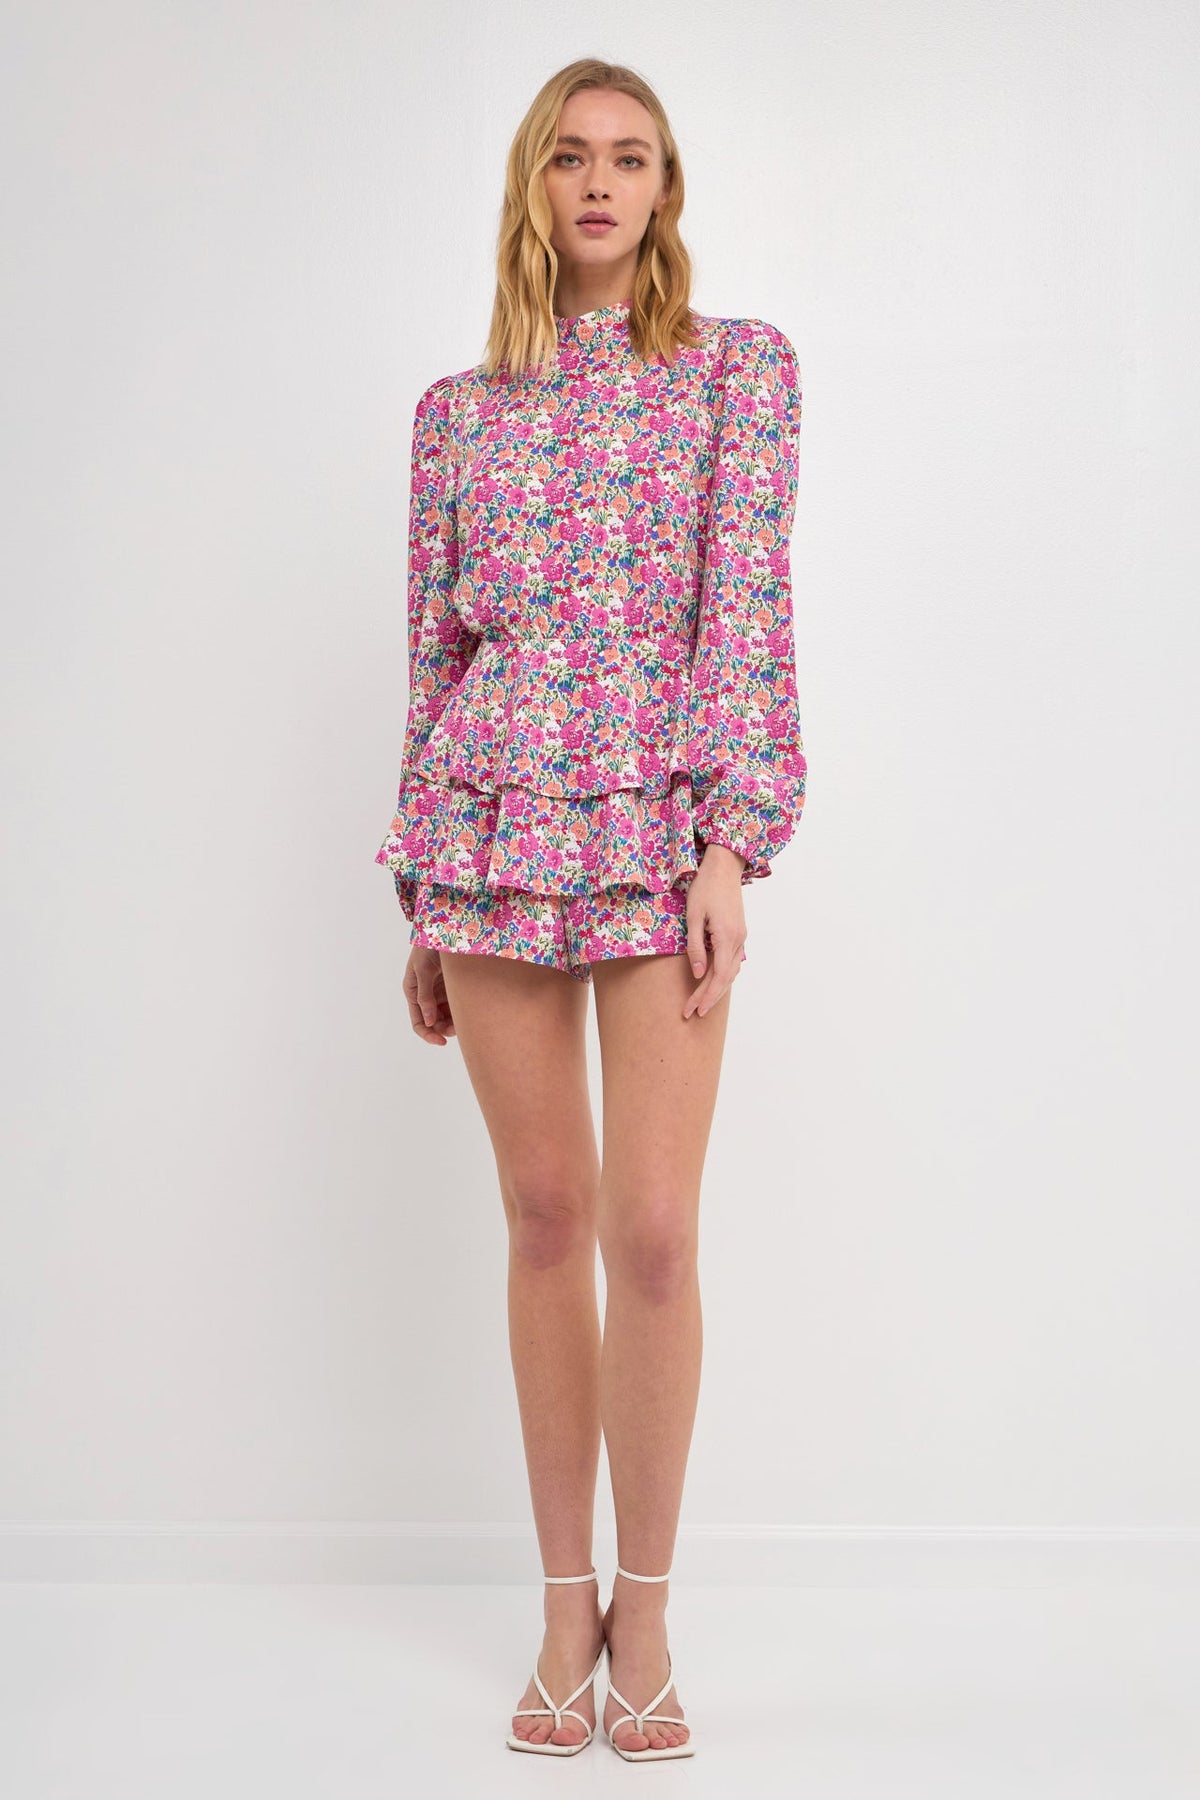 ENDLESS ROSE - Floral Garden Open Back Romper - ROMPERS available at Objectrare